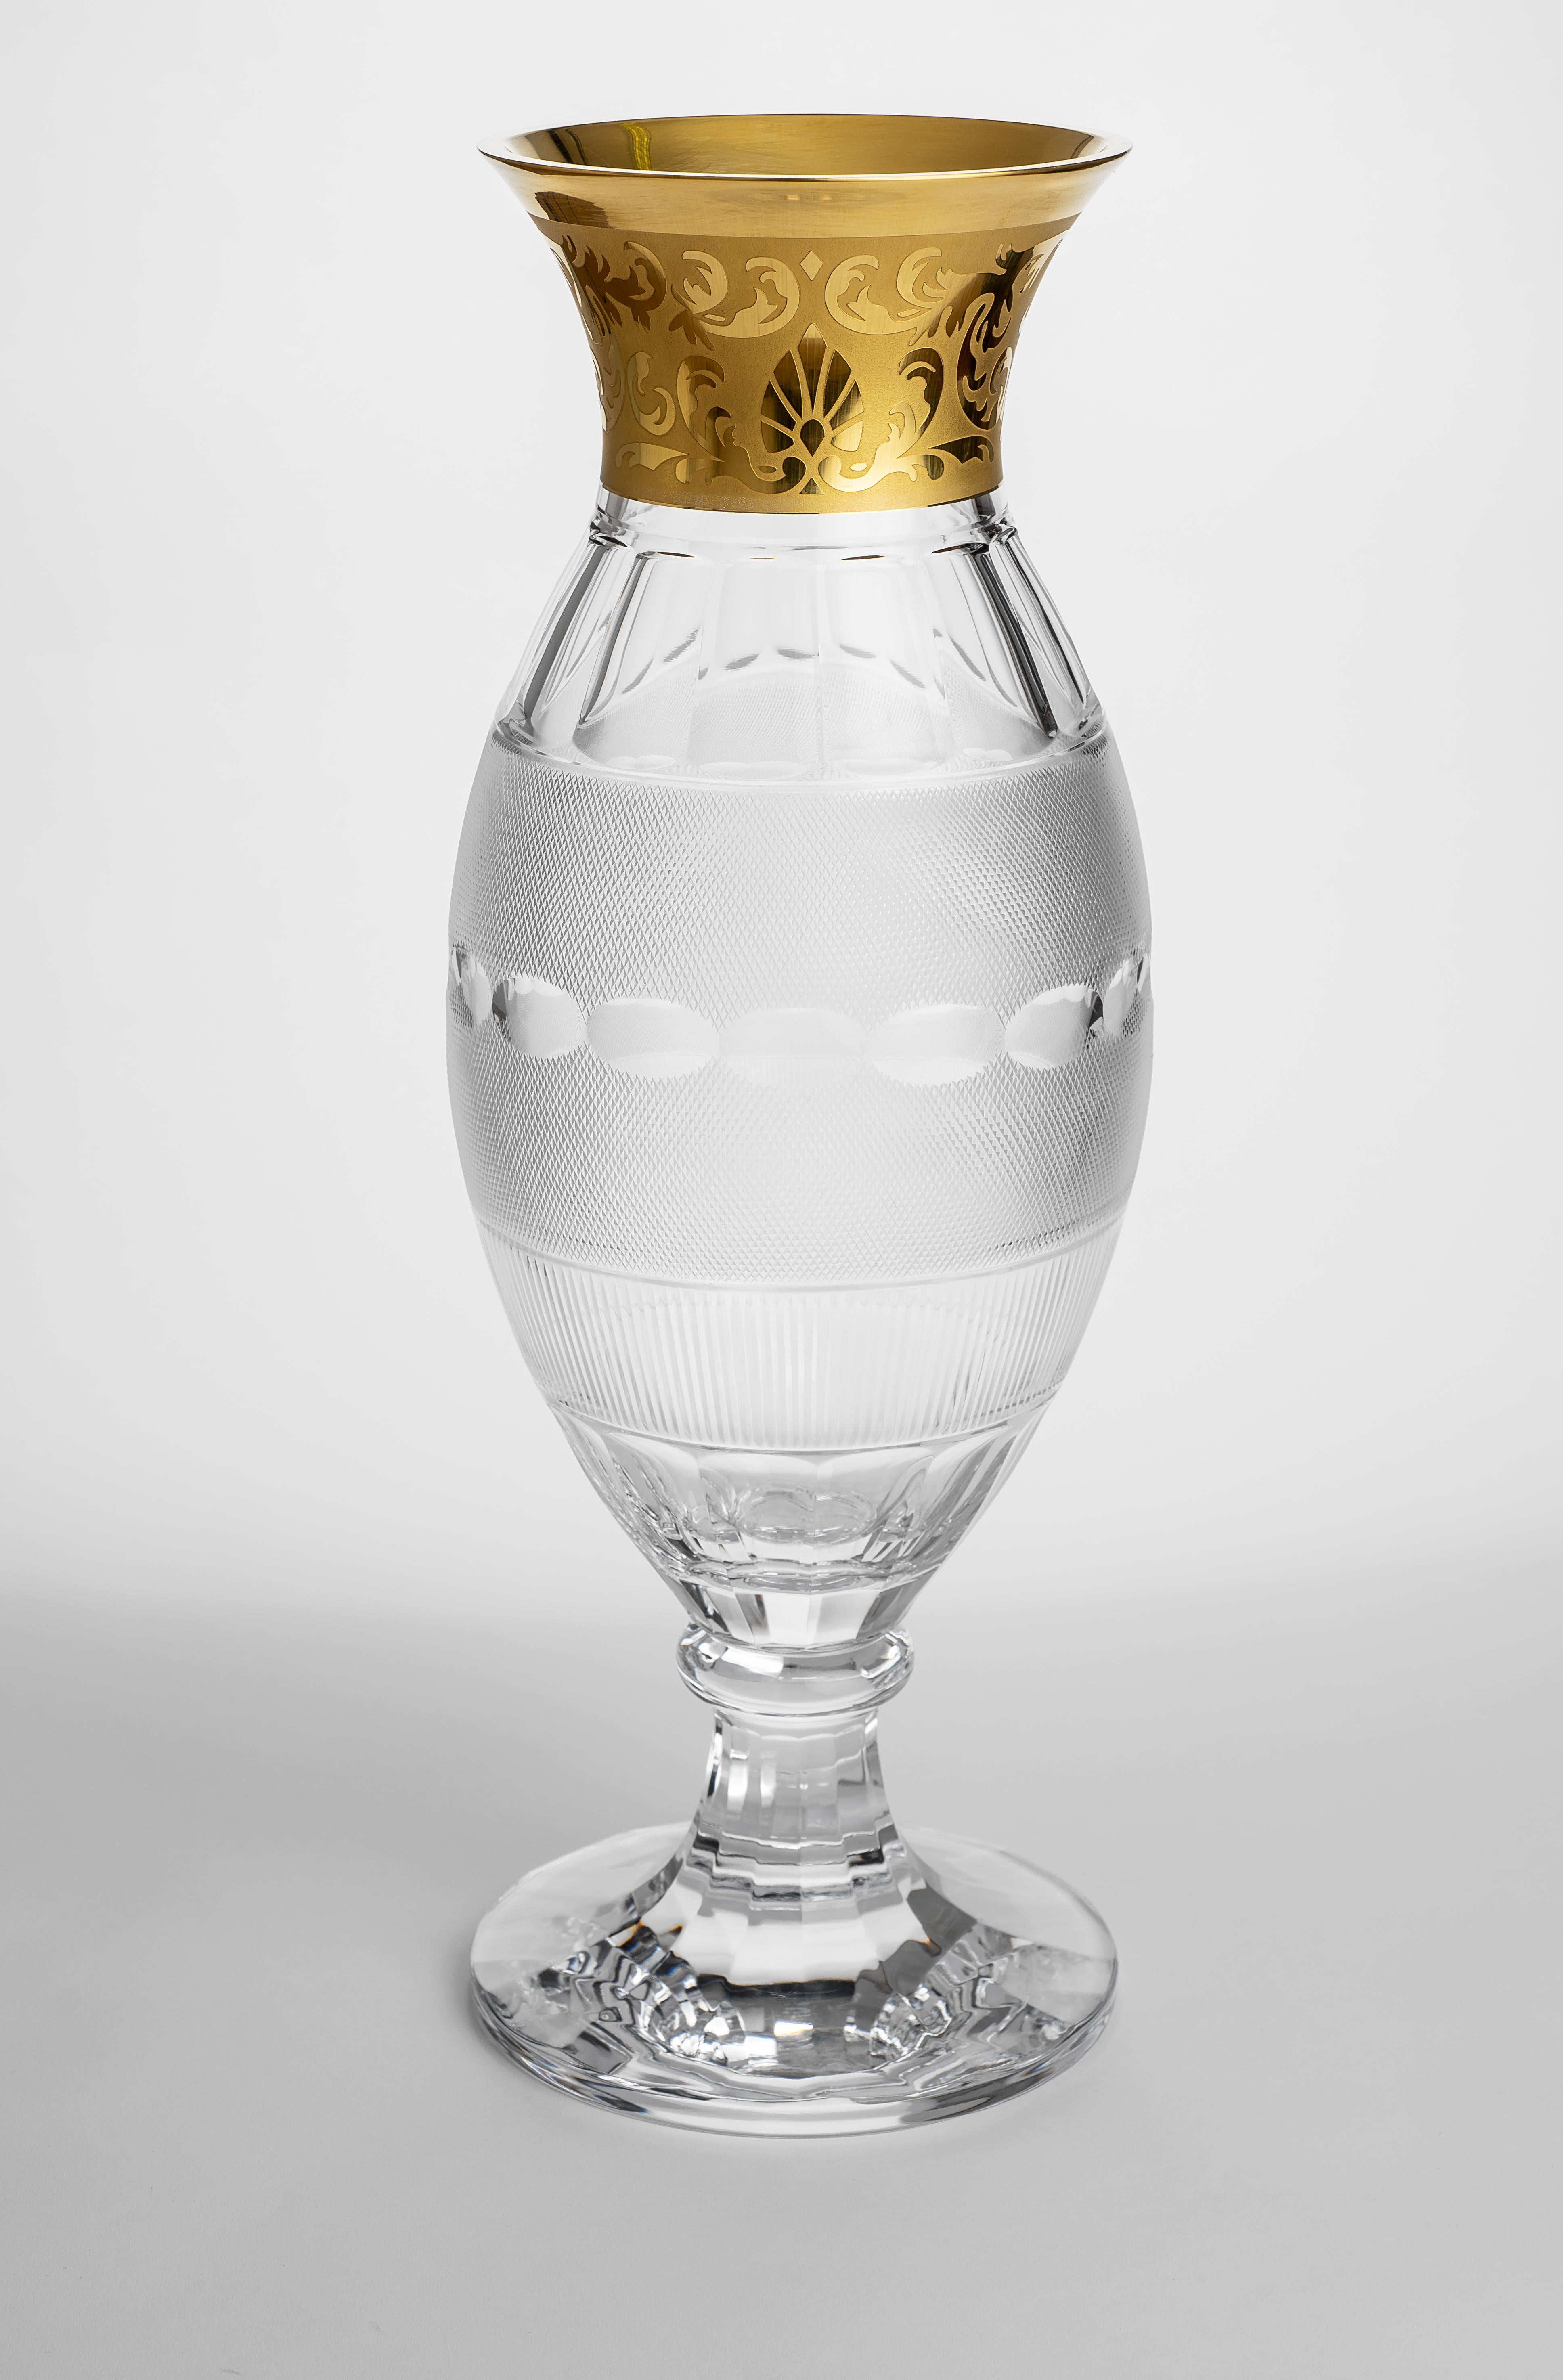 Leo Moser and his glassmakers in 1911 created a formal drinking collection that continues to shine at
royal banquets and light up the tables at all kinds of celebratory occasions. Measures: 18.7 inch
Splendid holds the attention with its